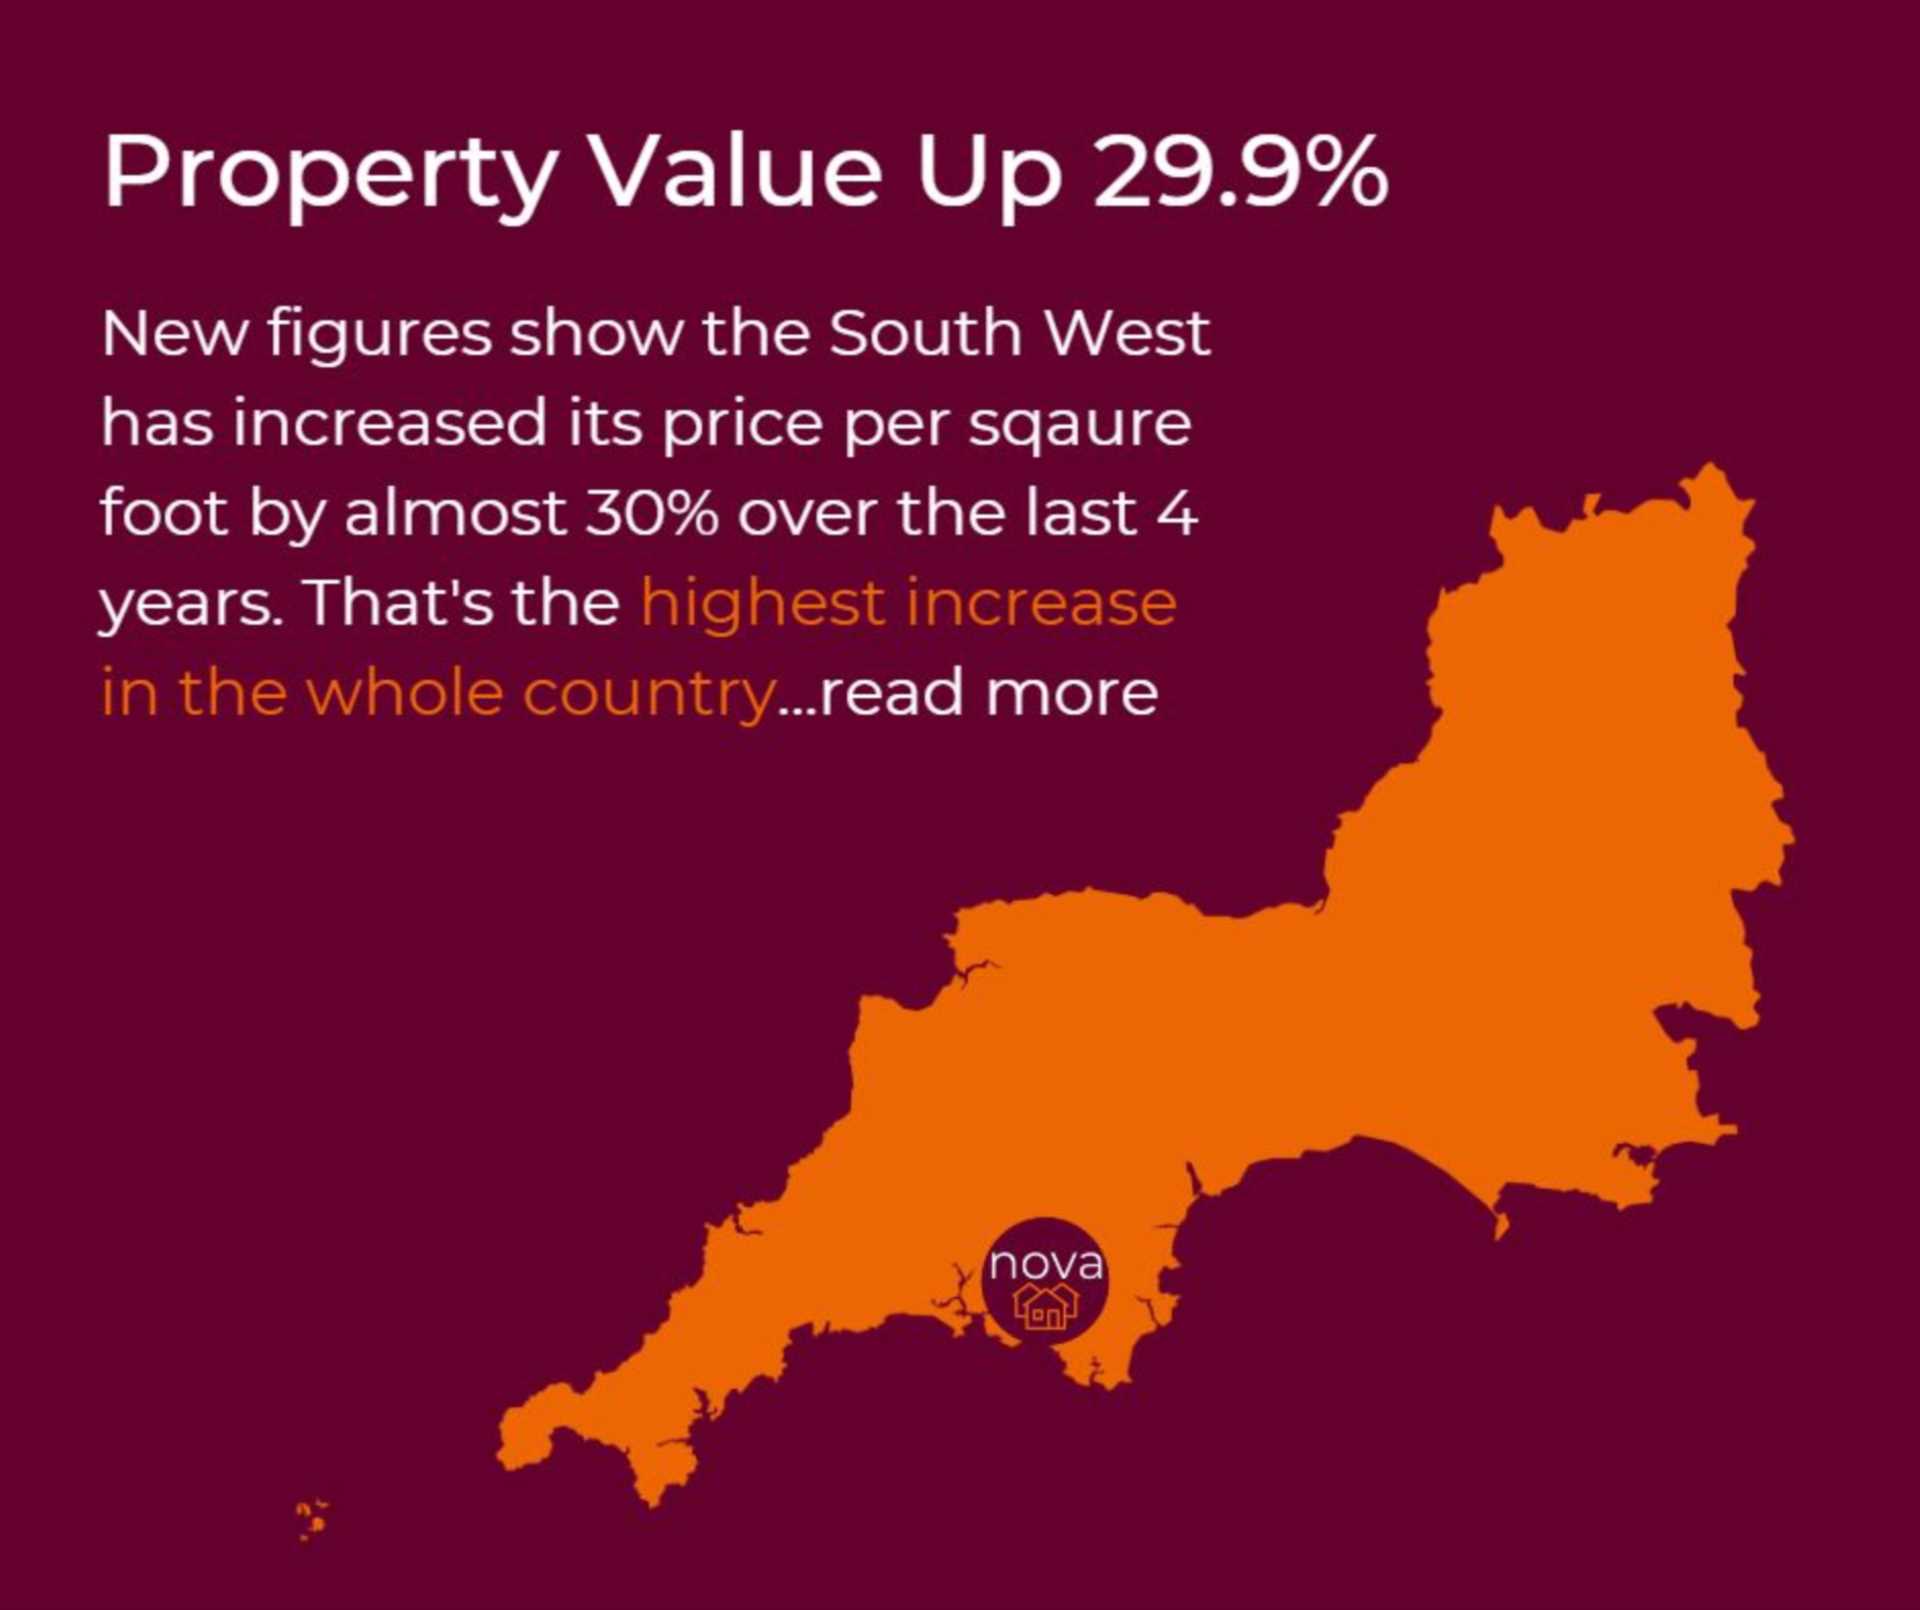 House Prices In South West Up By Nearly 30% In 4 Years